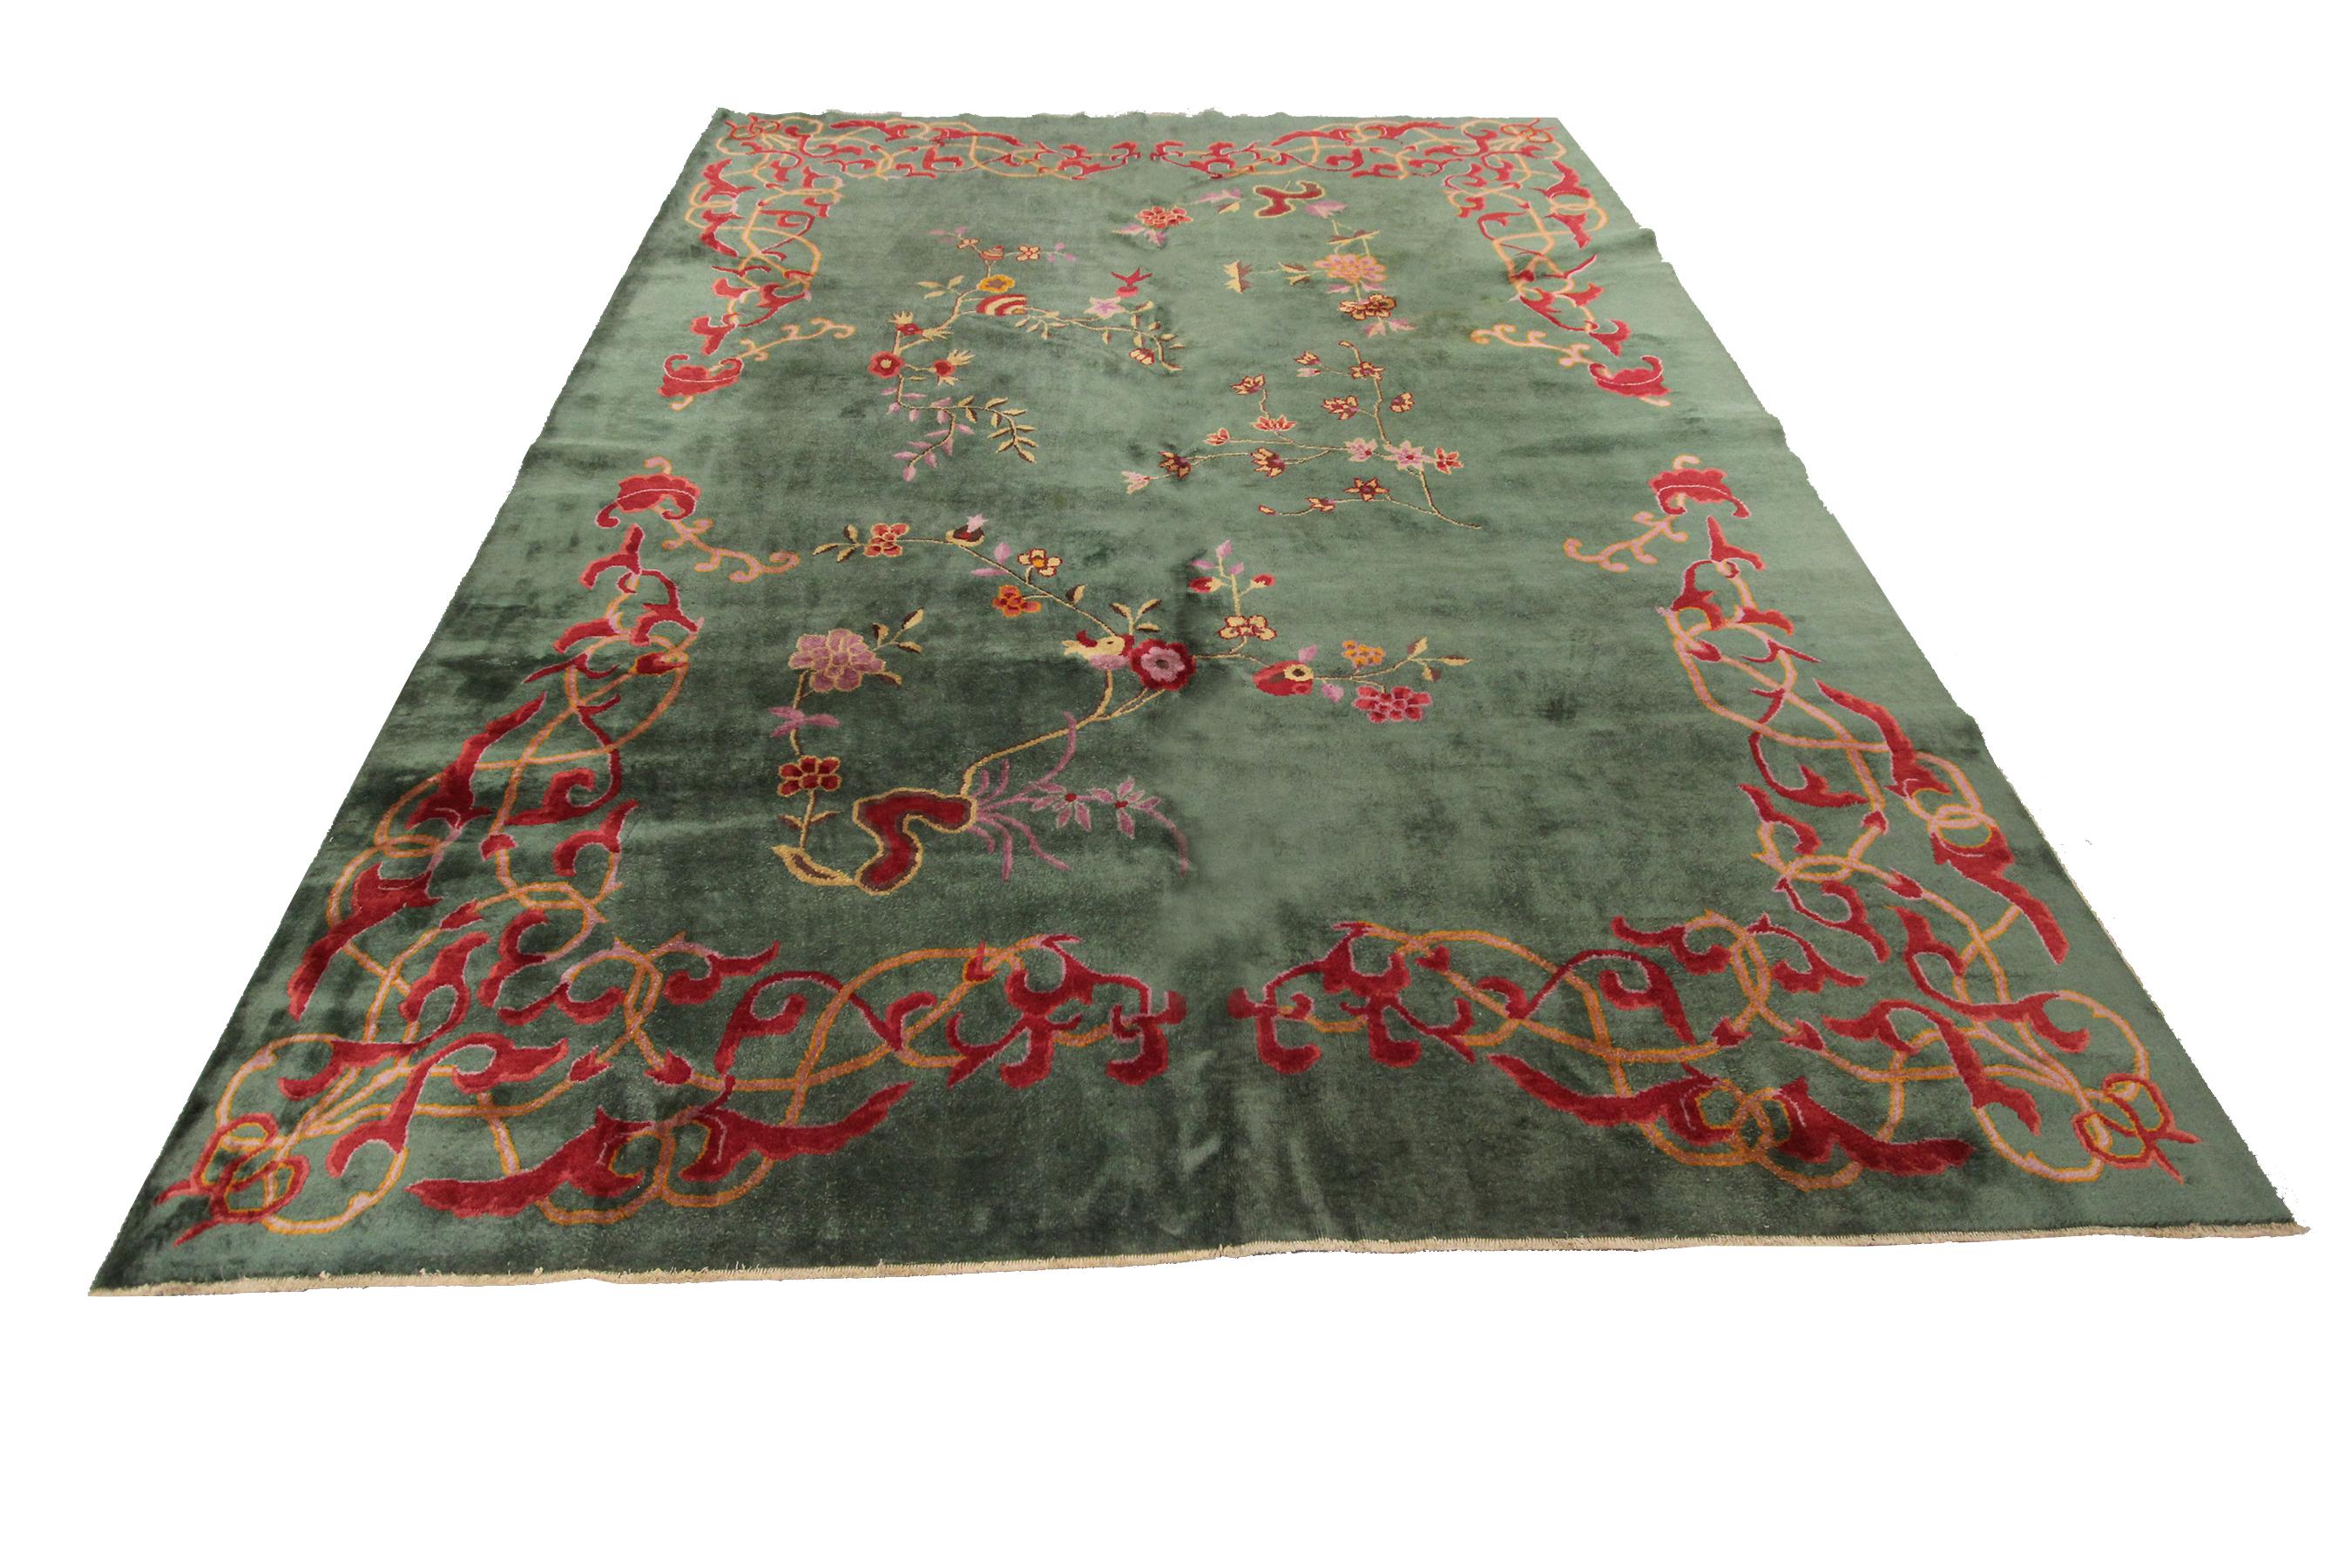 Early 20th Century Antique Art Deco Chinese Rug Antique Chinese Rug Antique Art Deco Rug Green